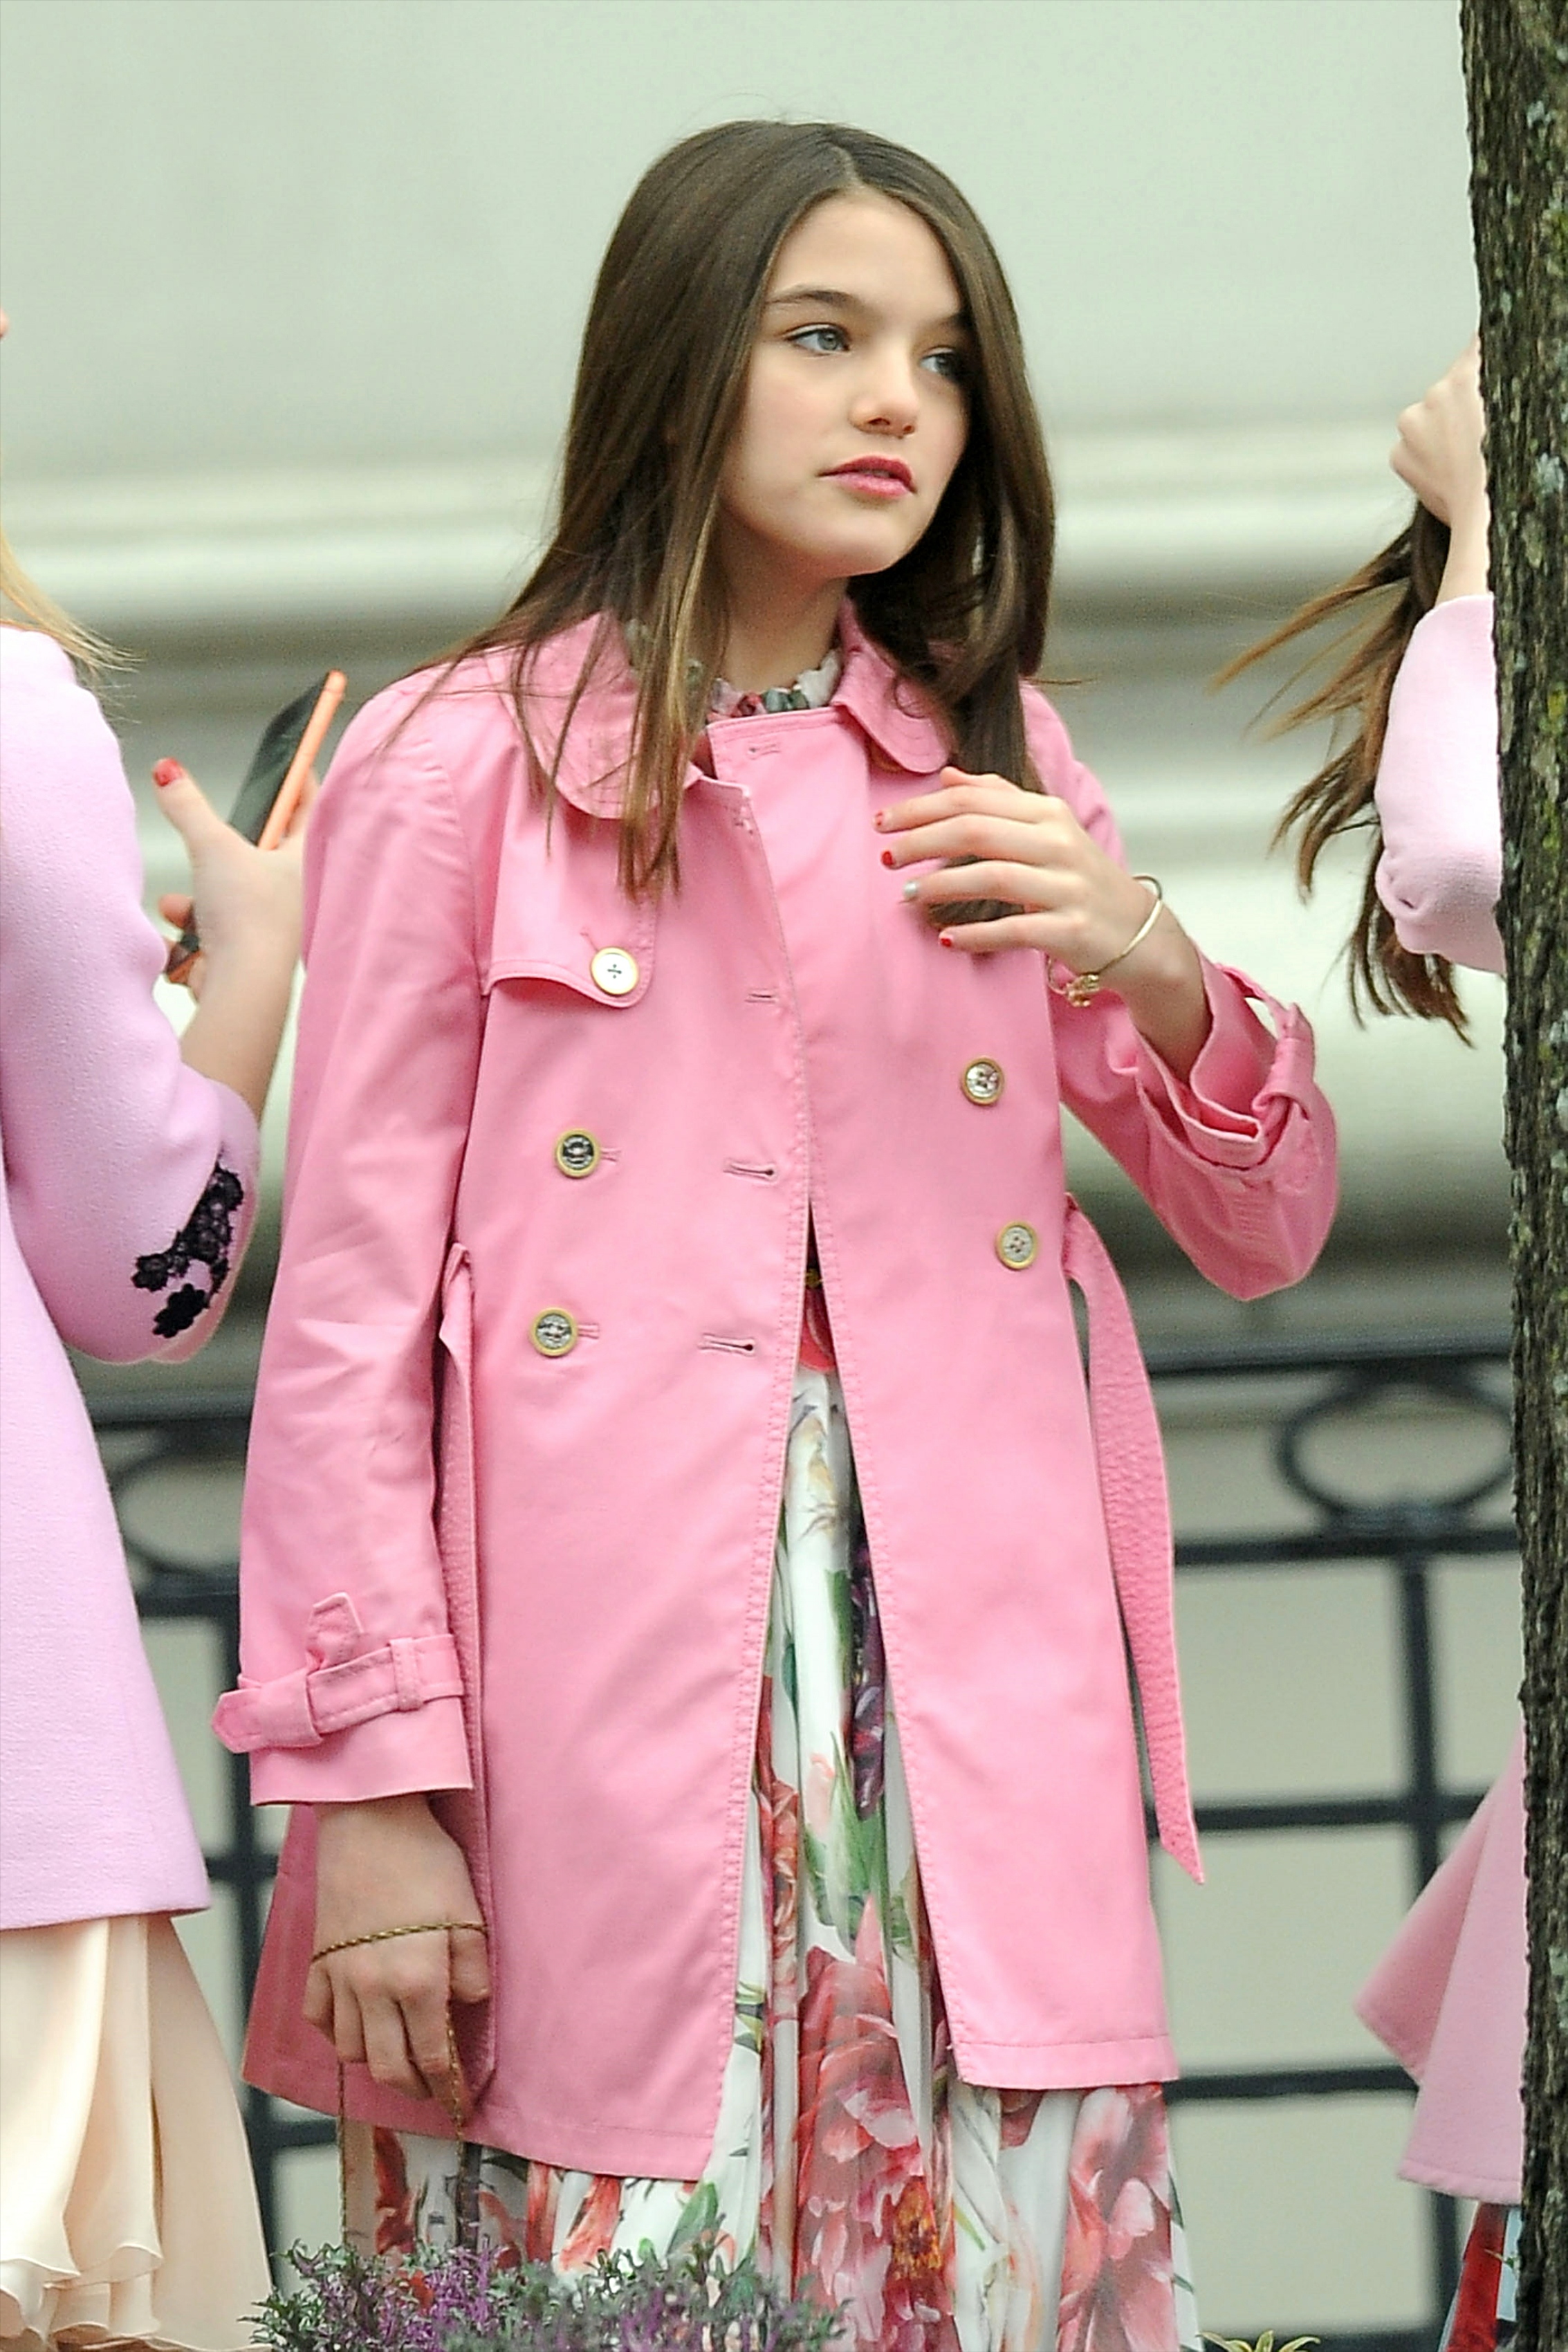 Suri Cruise Grown Up See Tom Cruise and Katie Holmes' Daughter Now